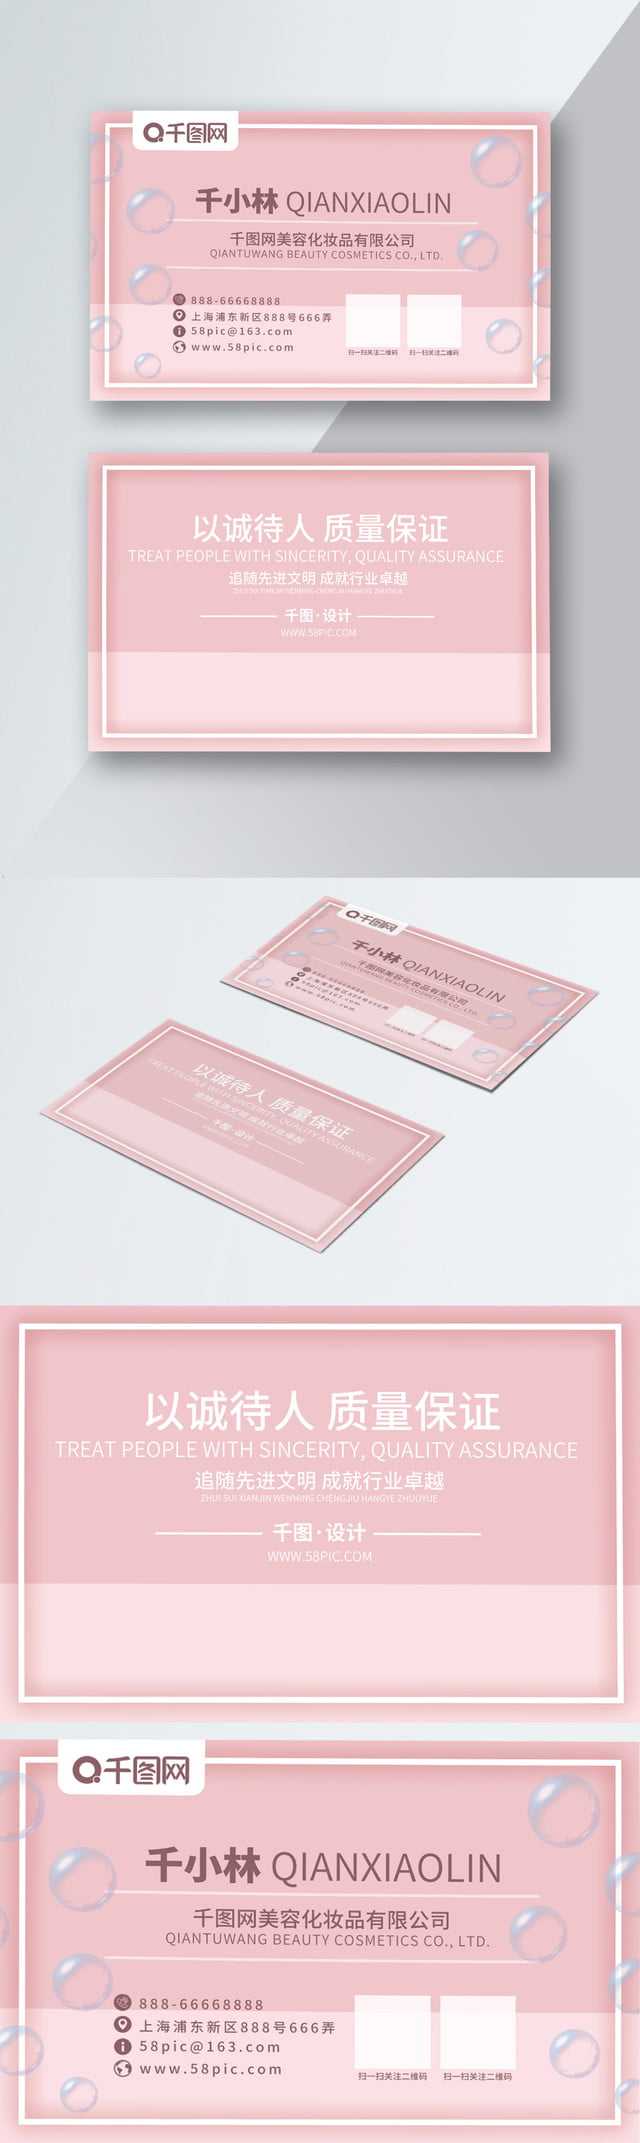 Mary Kay Business Card Free Download Cdr Background Creative Pertaining To Mary Kay Business Cards Templates Free